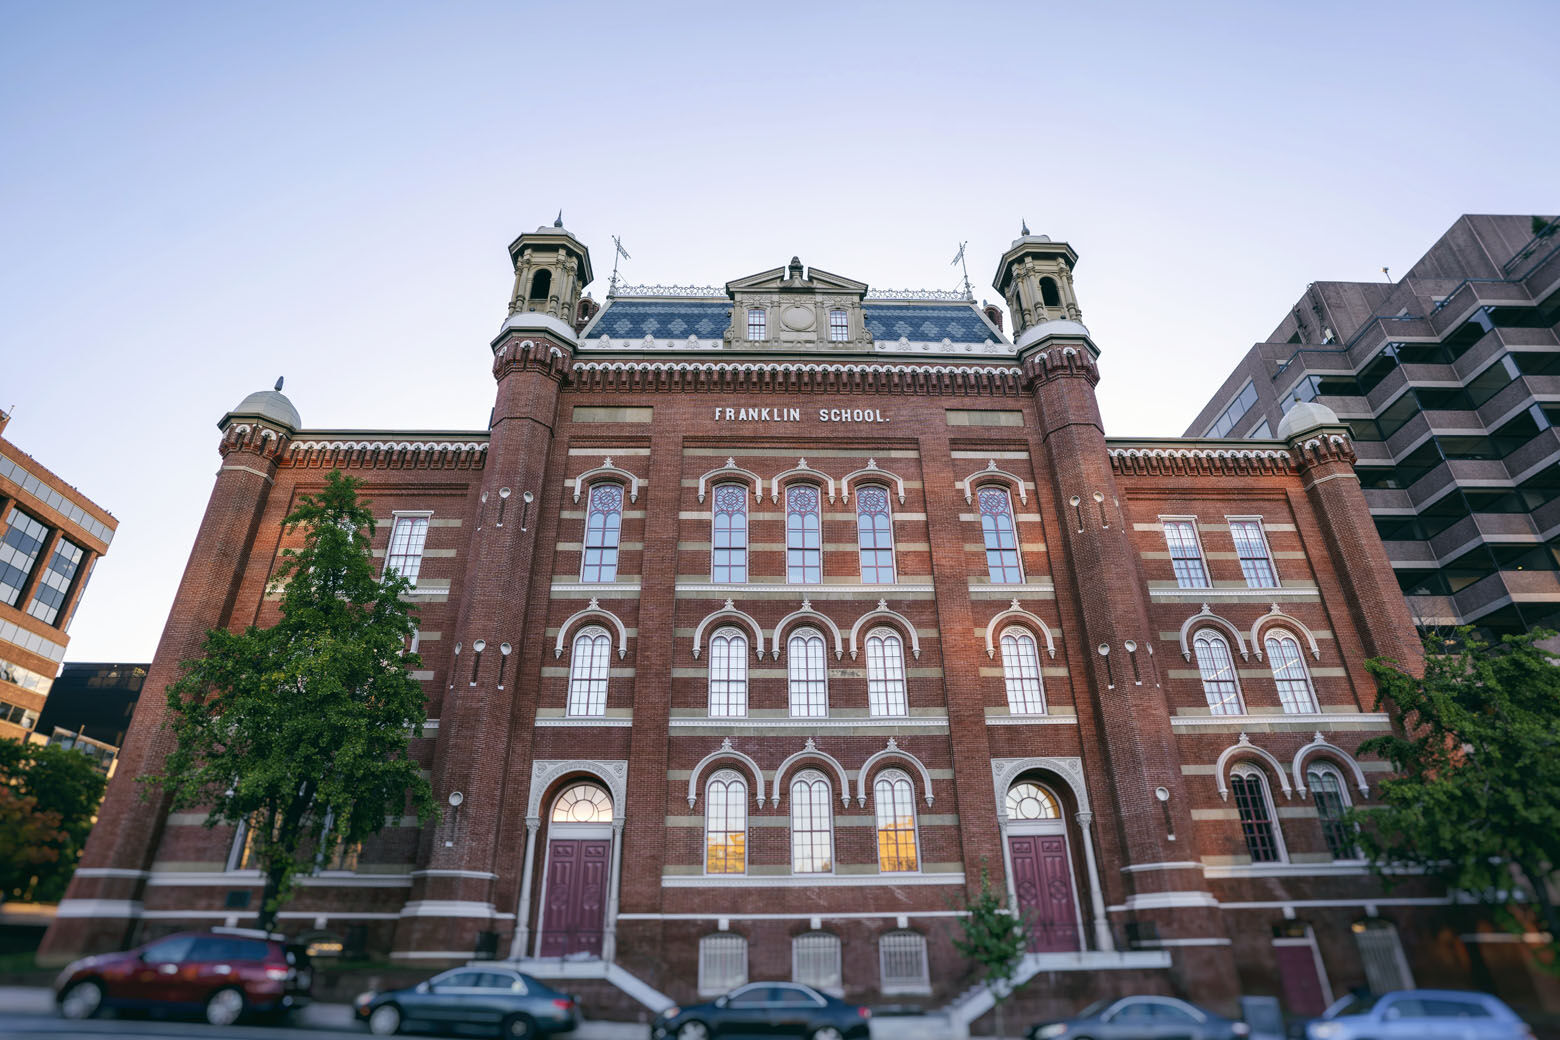 The new museum is located in the historic former Franklin School building at 13th and K streets in Northwest D.C. (Courtesy DuHon Photography/Long Story Short Media)